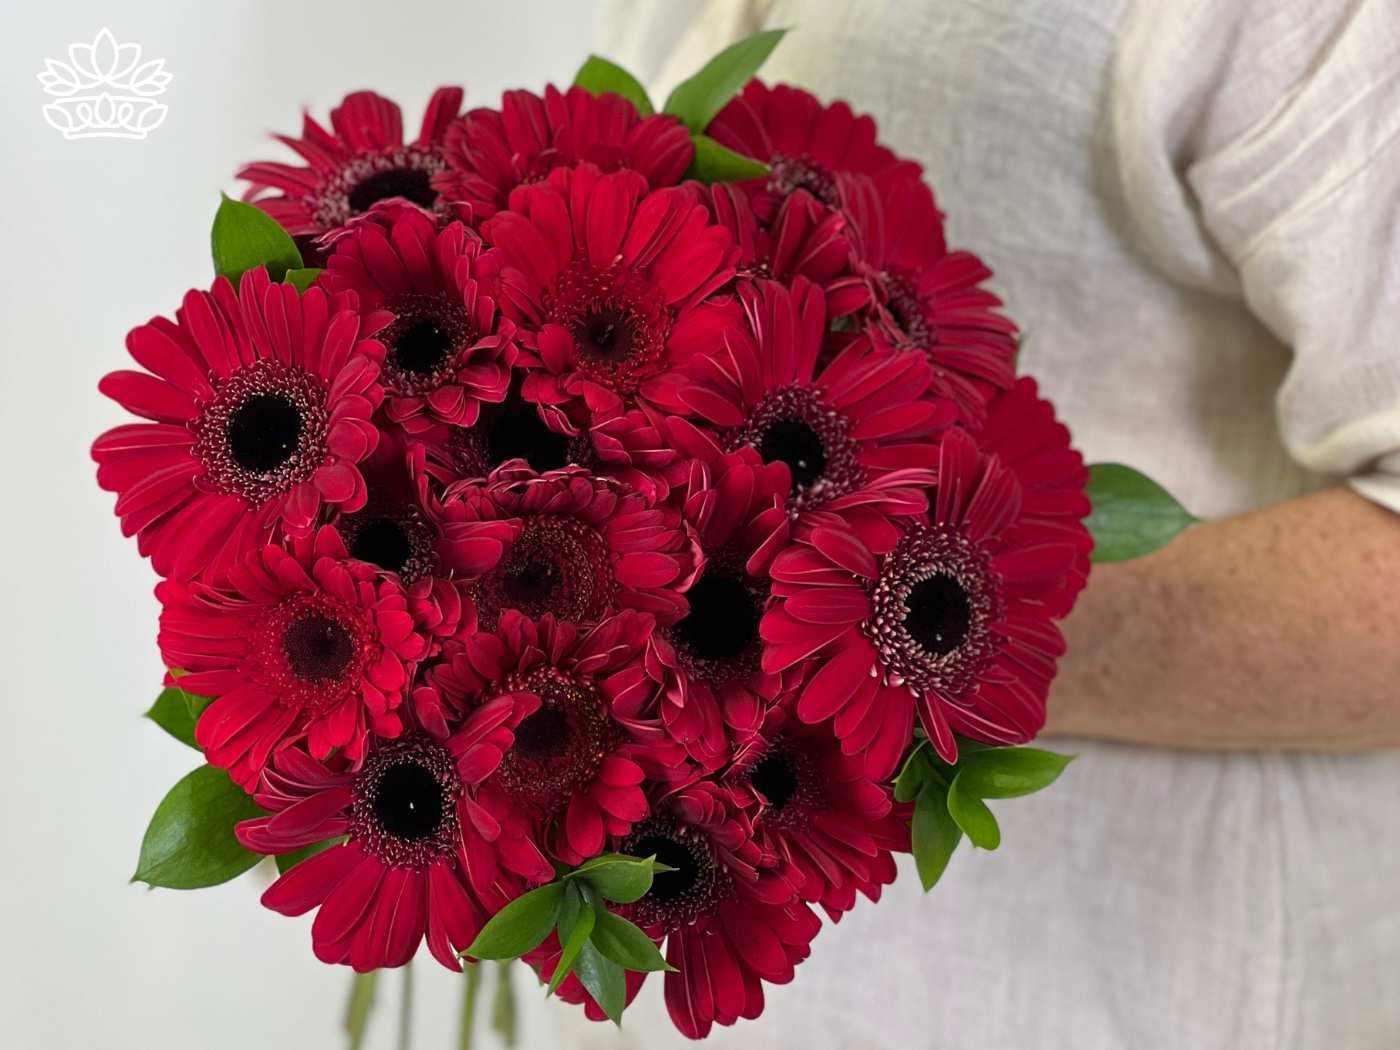 A bouquet of deep red Gerbera daisies, arranged with green foliage and held with care. Fabulous Flowers and Gifts. Gerberas Collection. Delivered with Heart.